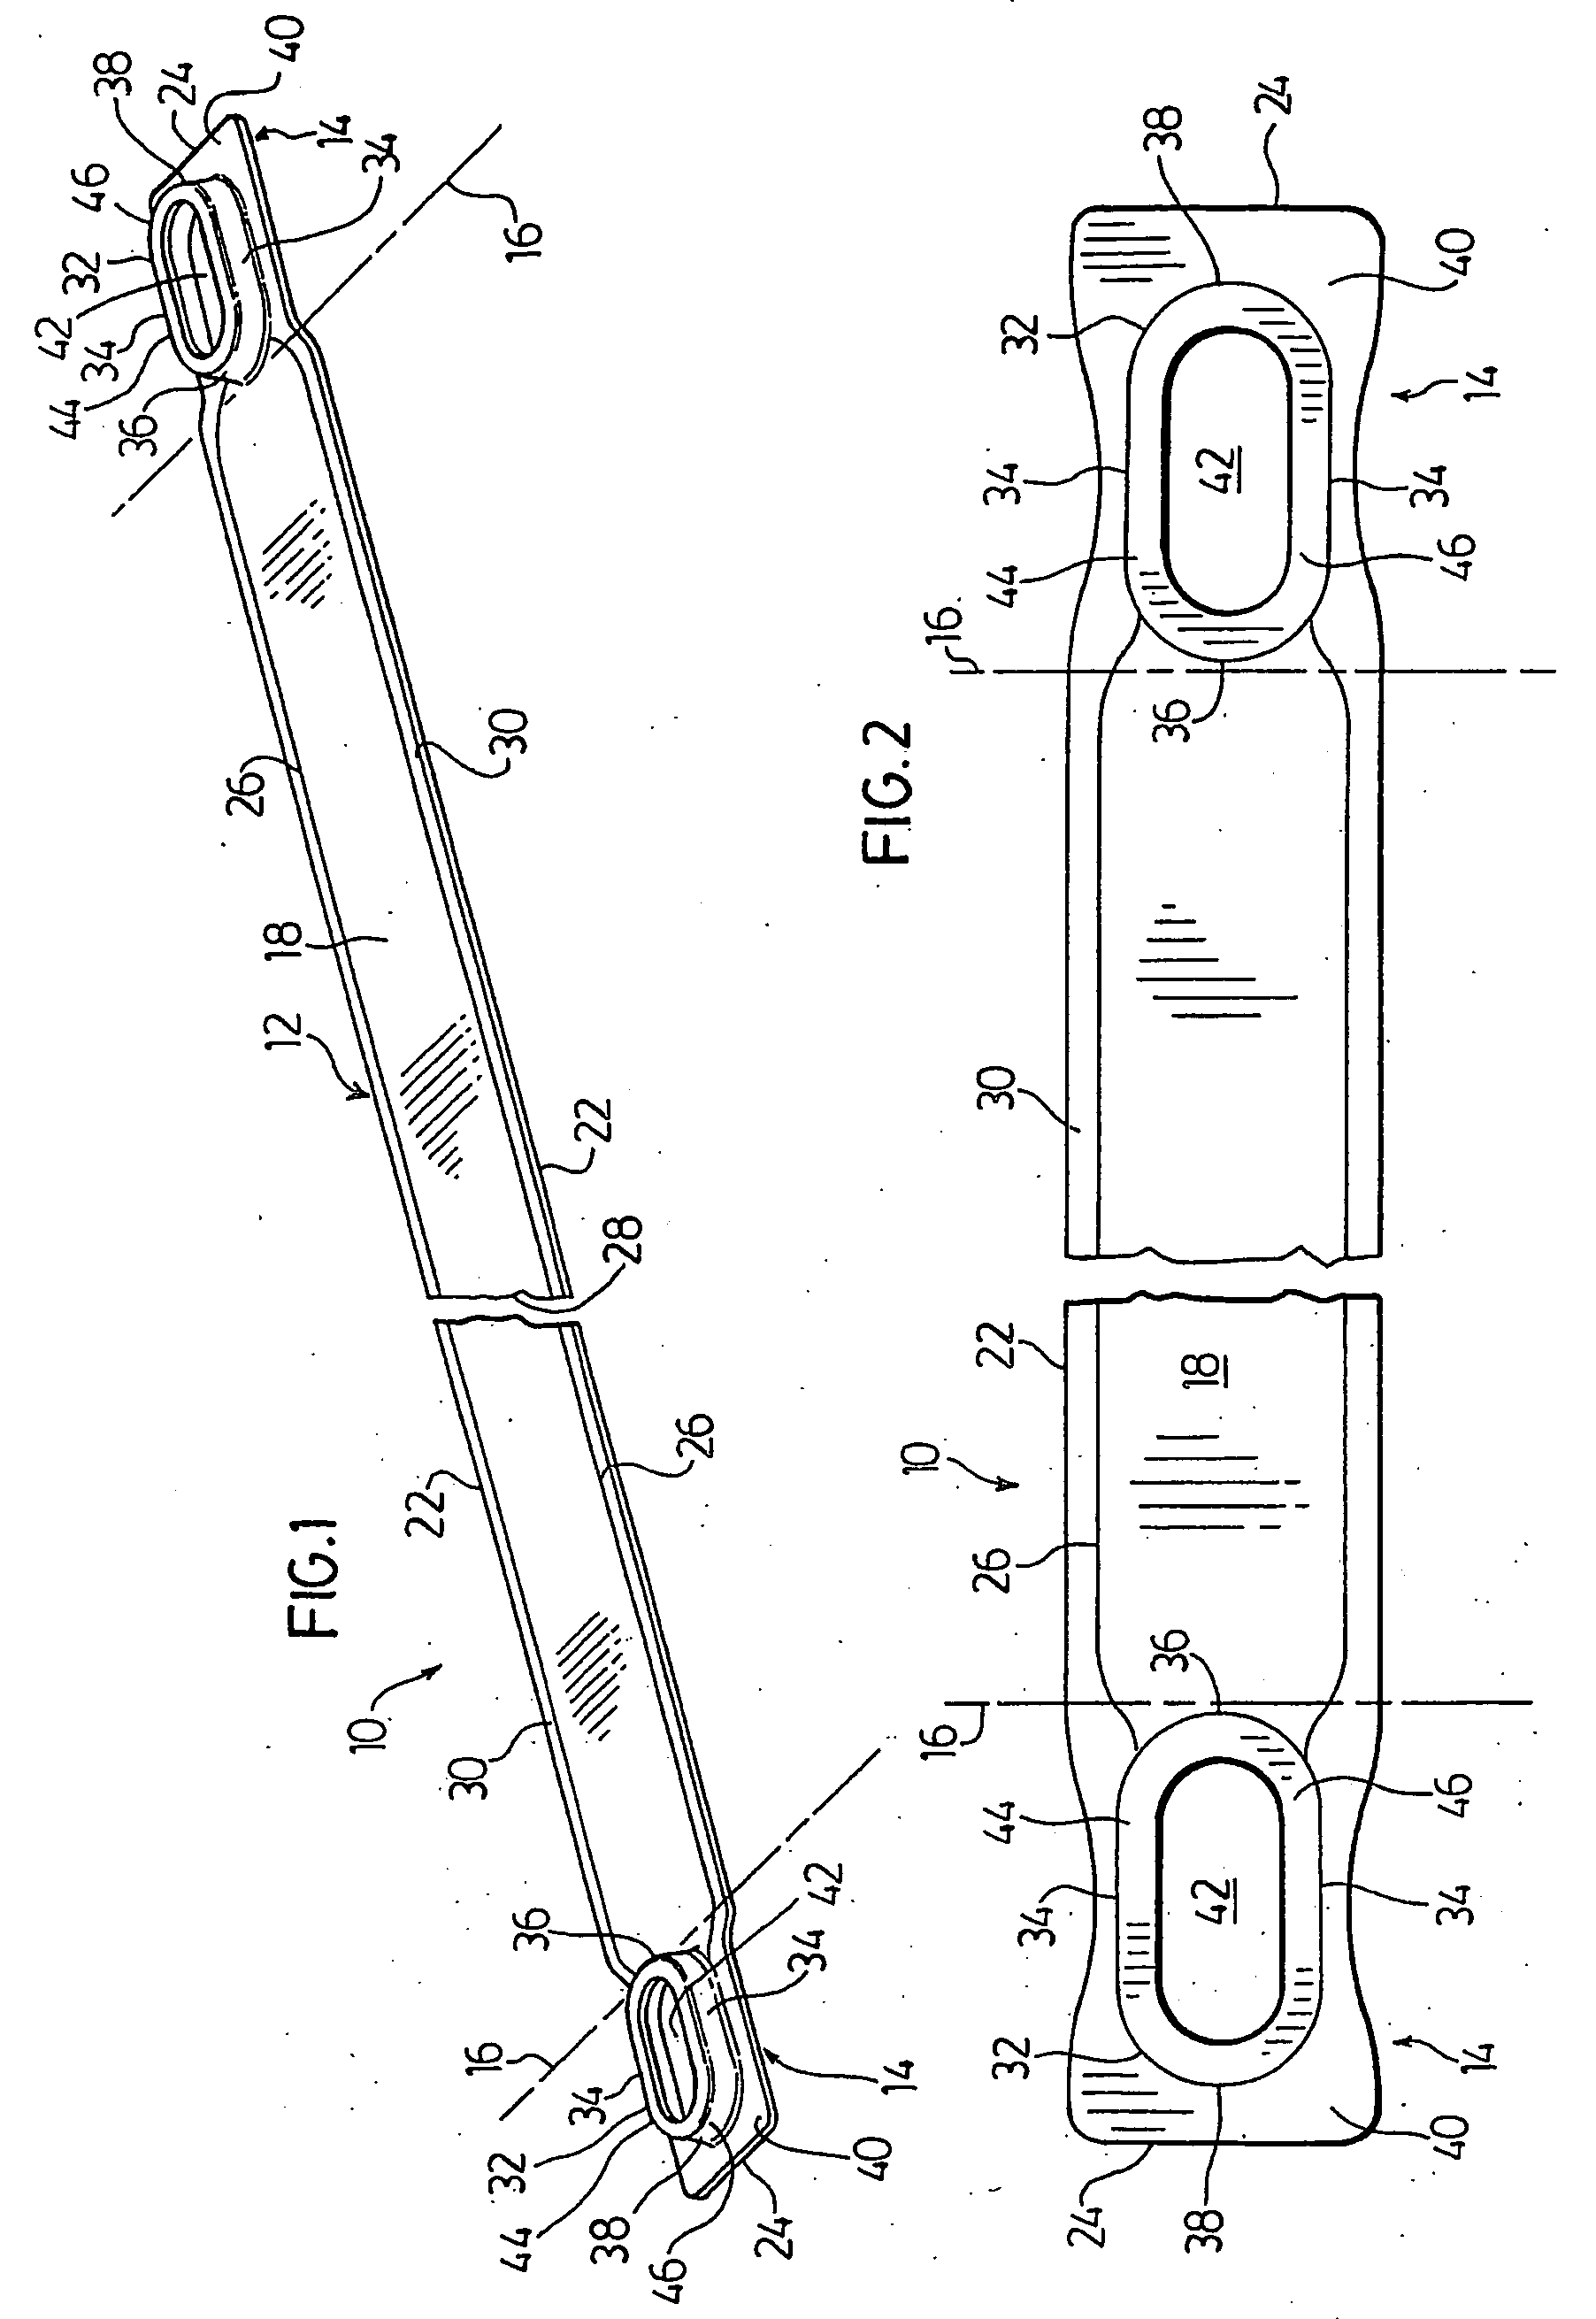 Heat exchanger plates and methods for manufacturing heat exchanger plates